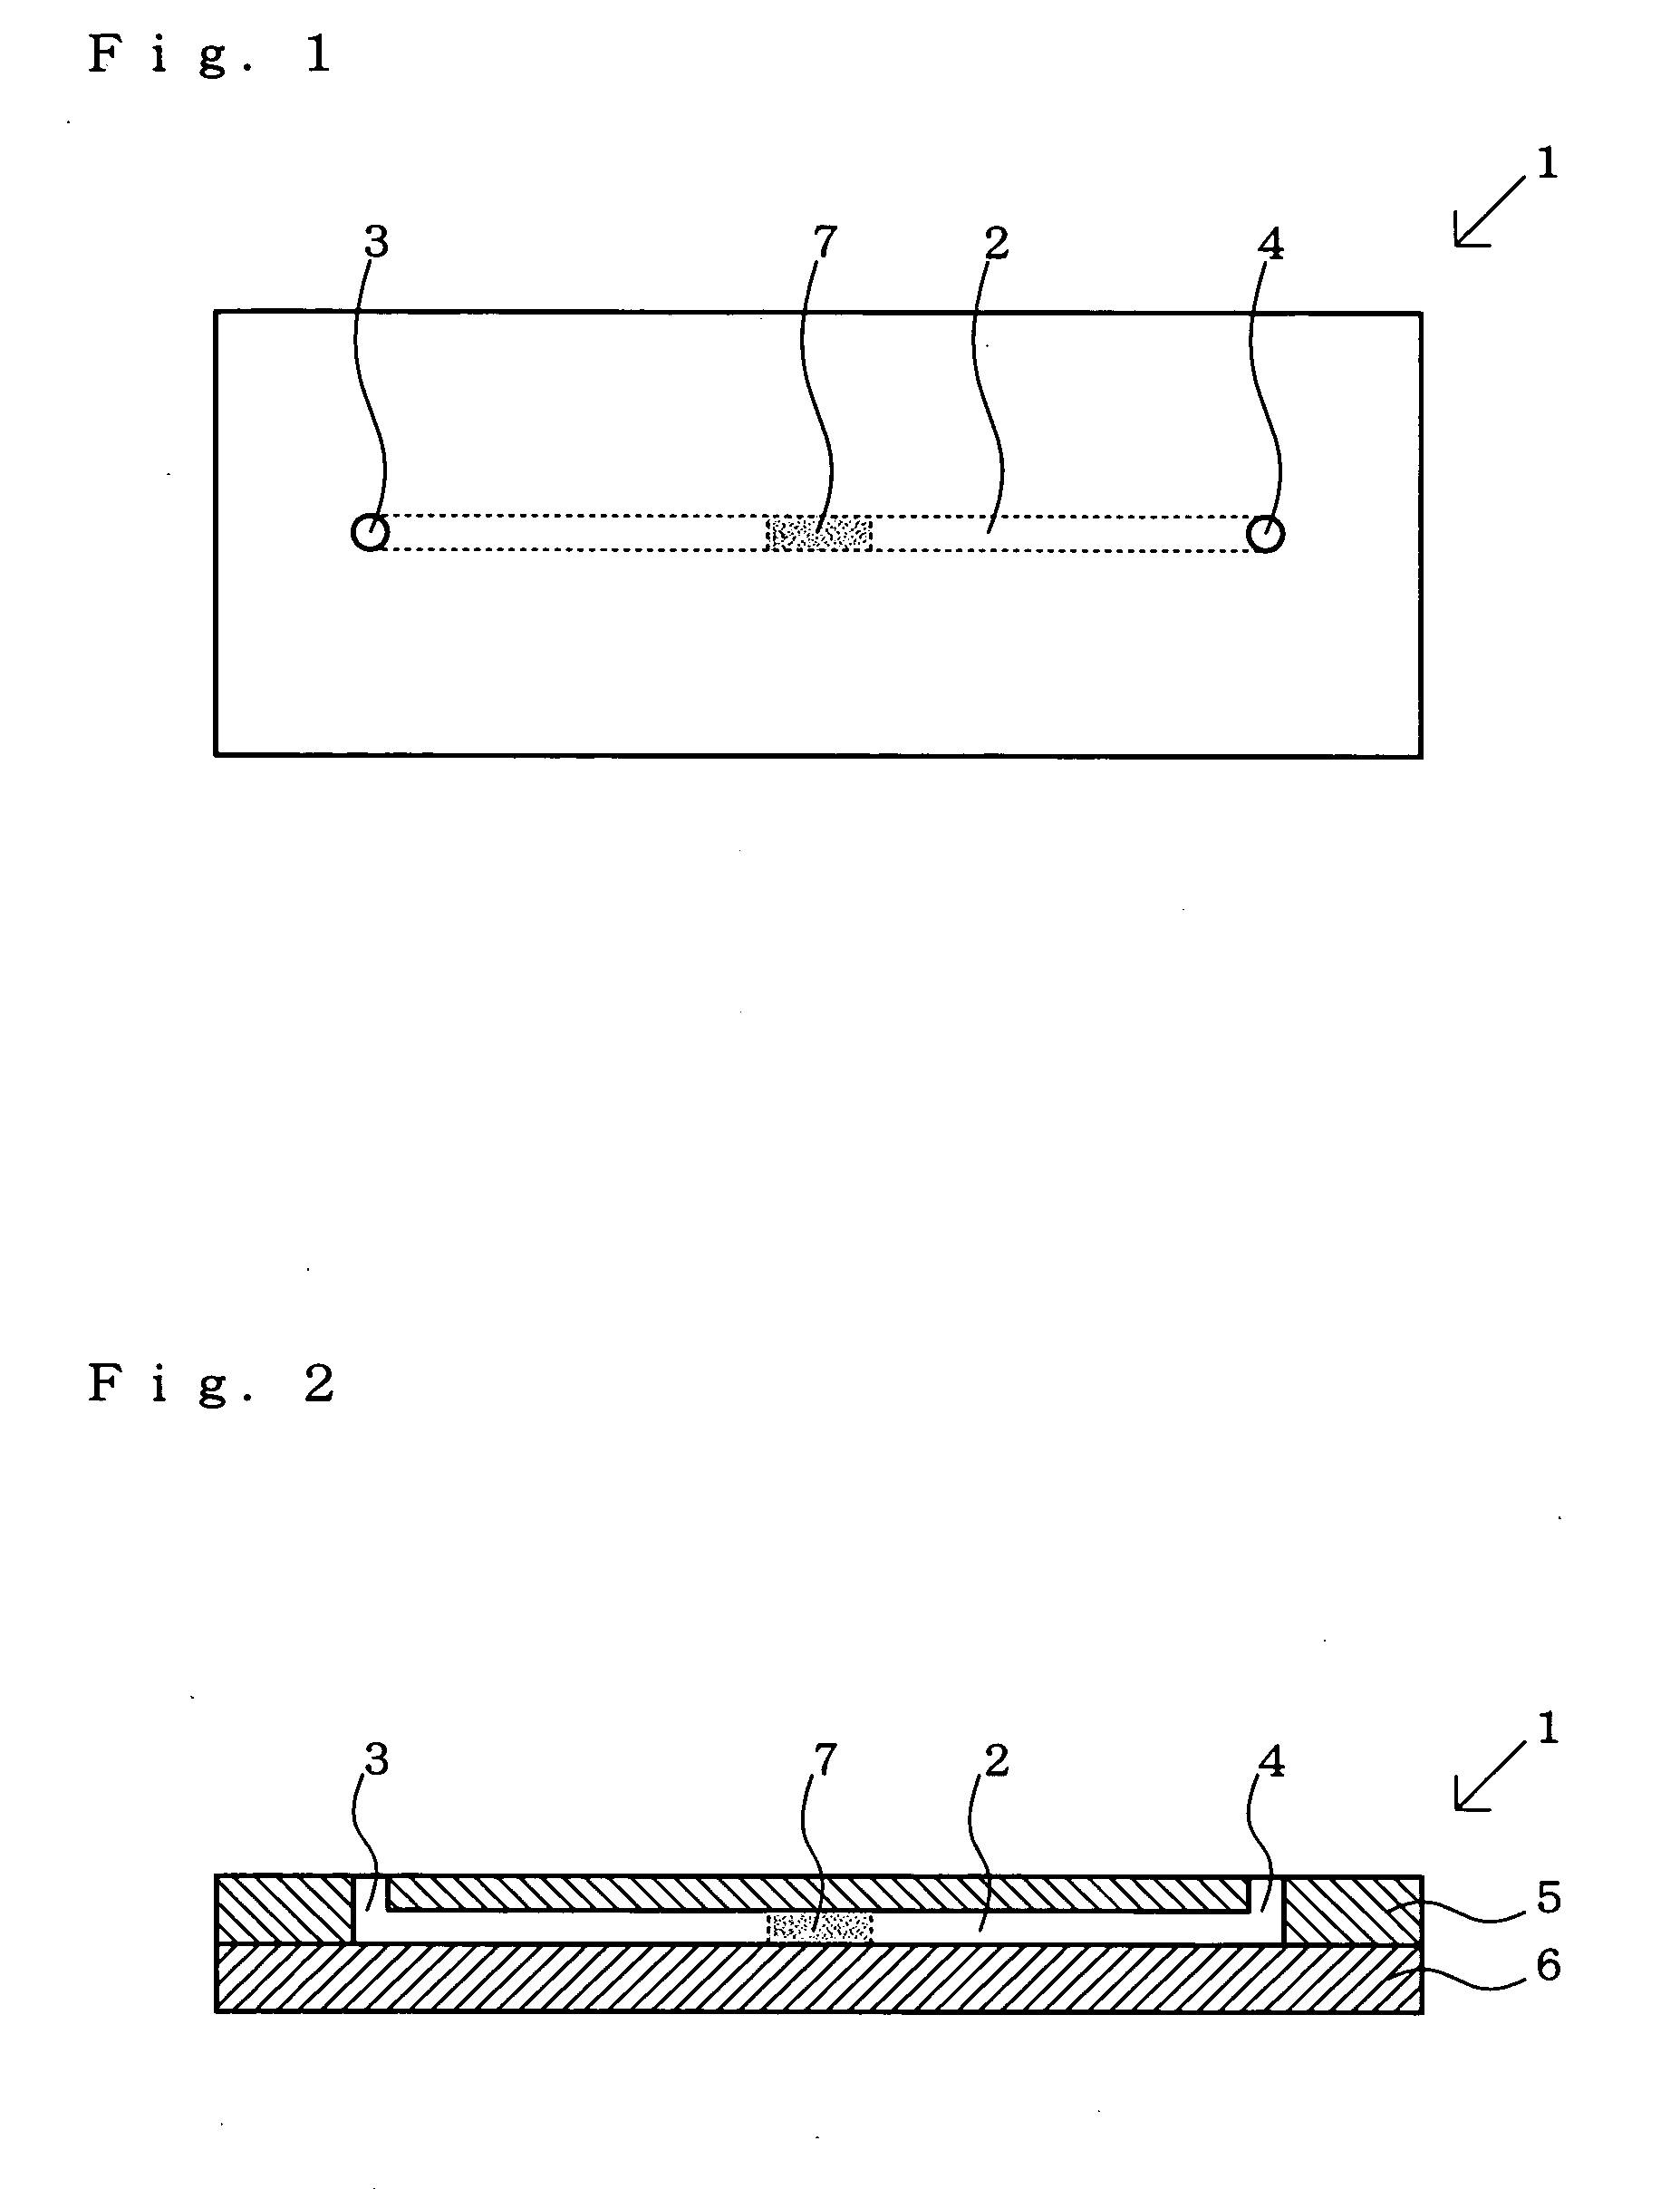 Kit, Device and Method For Analyzing Biological Substance